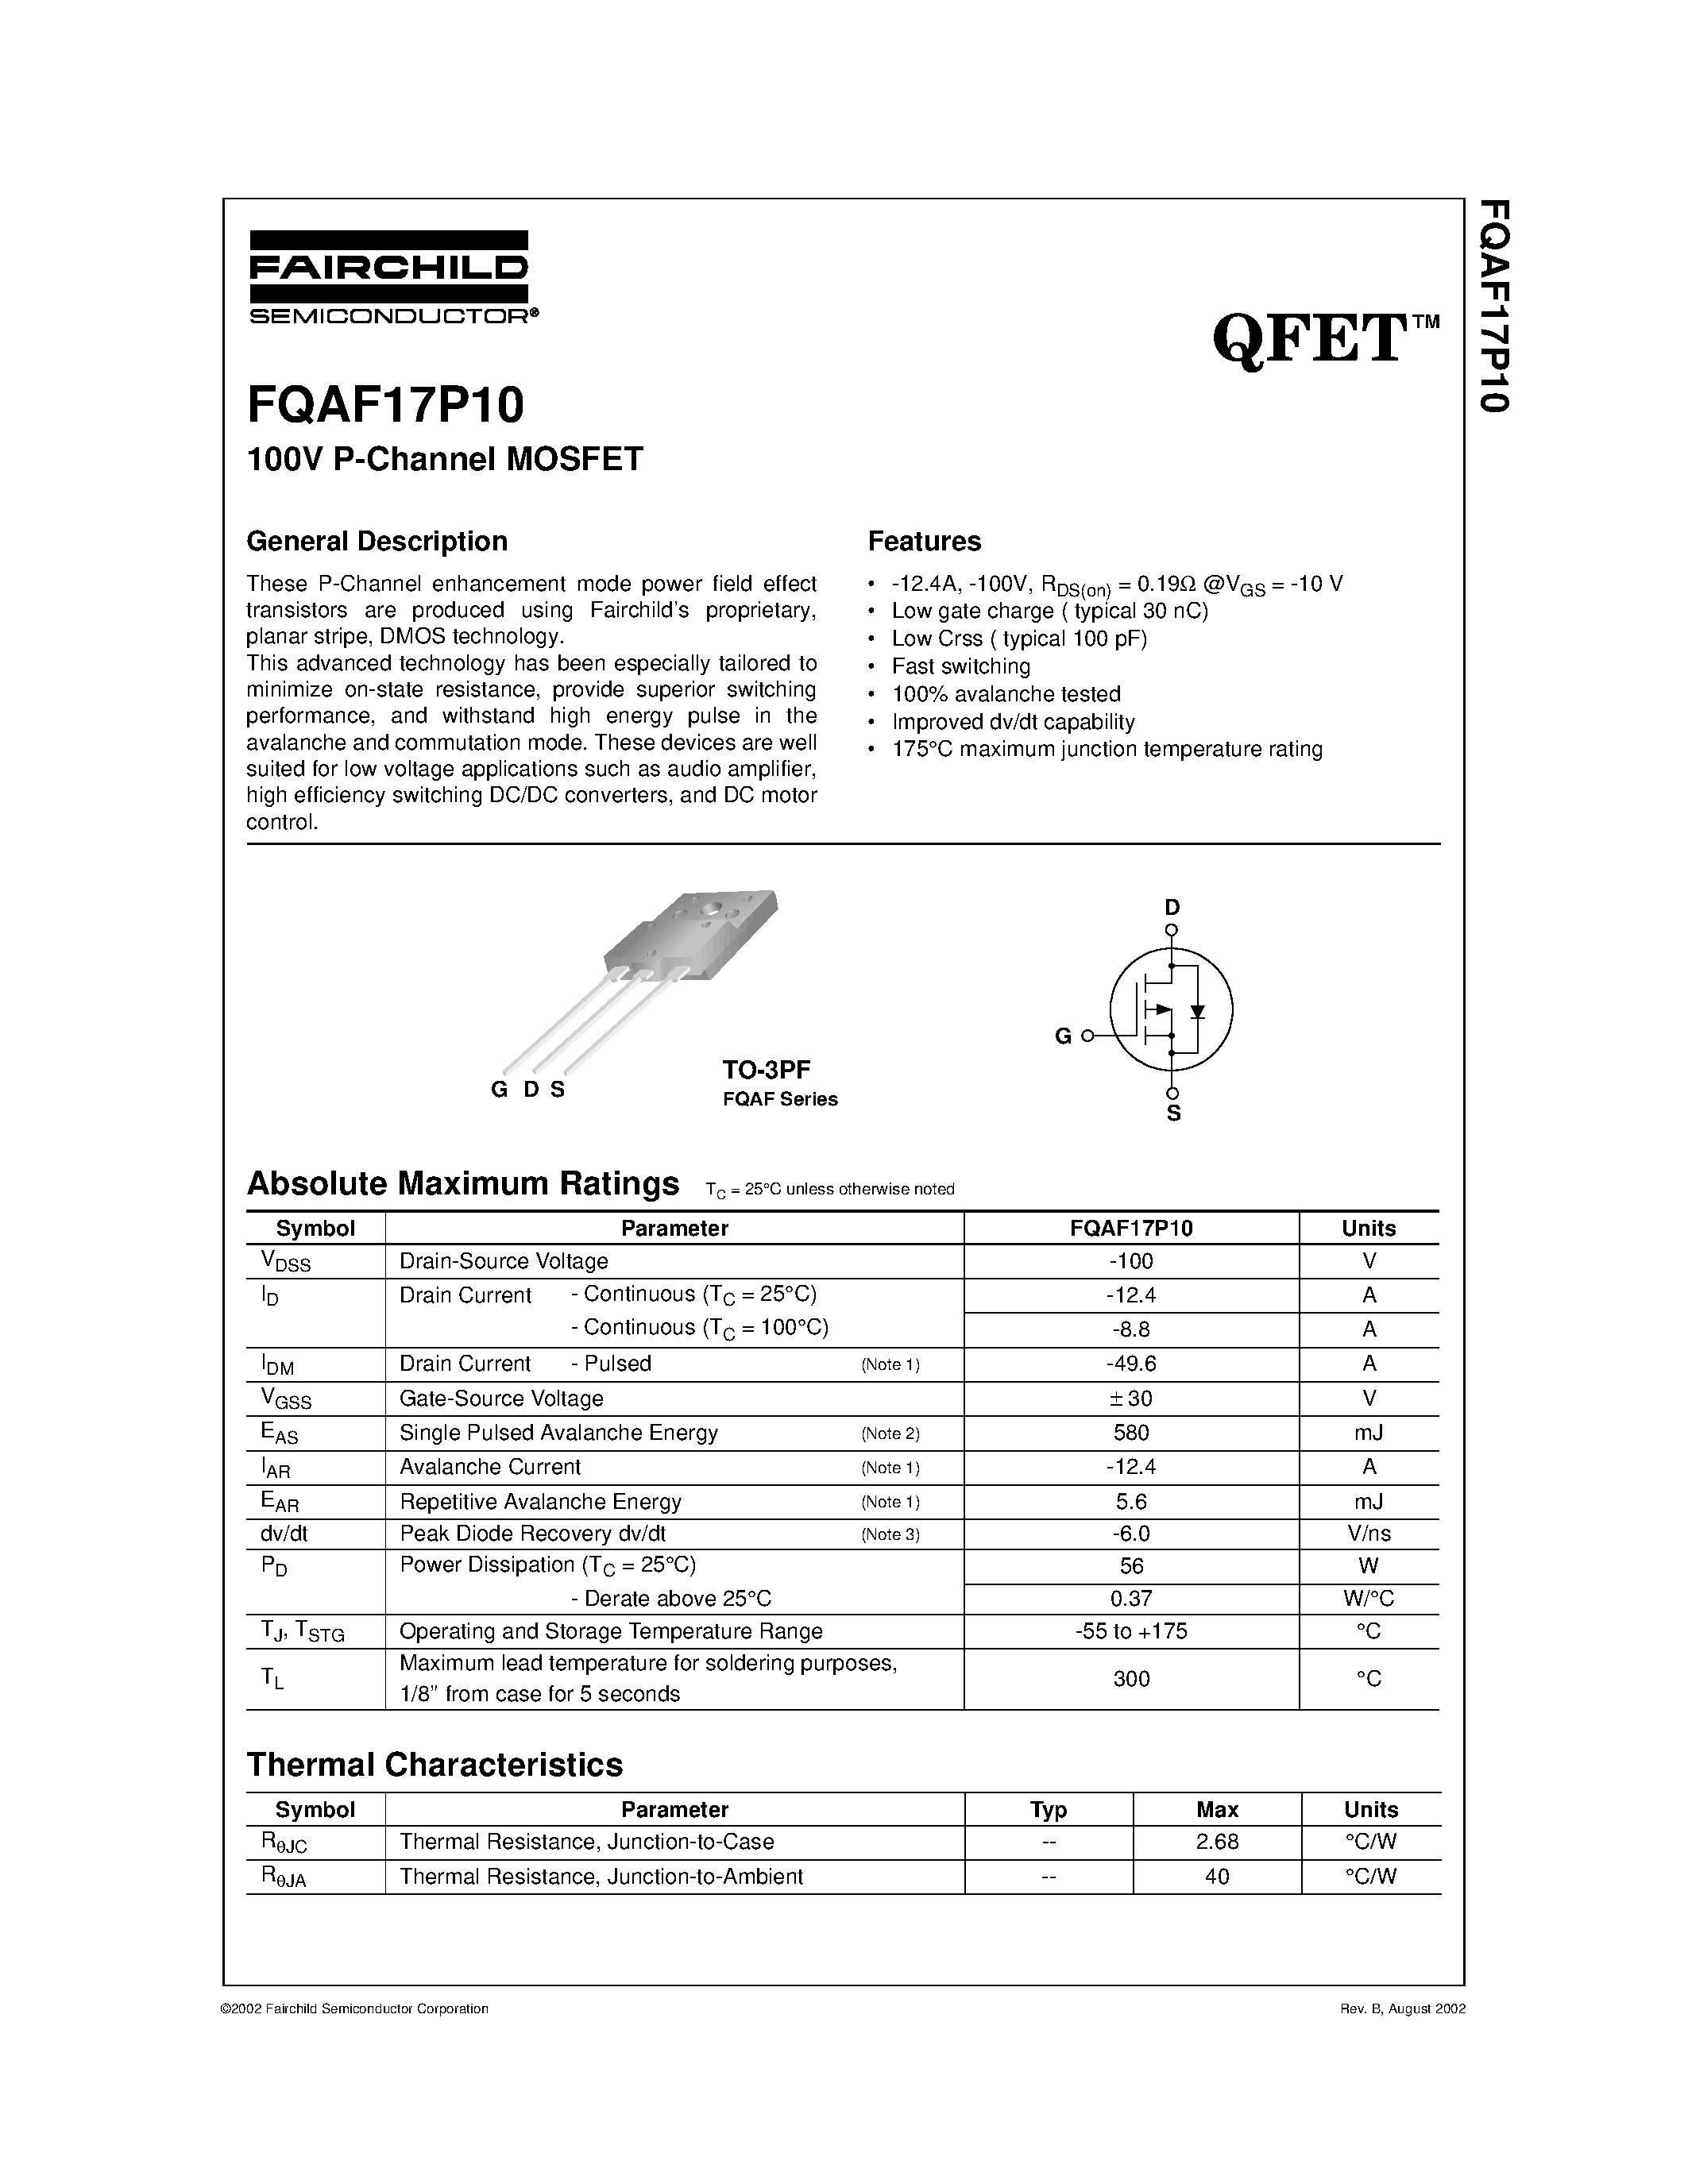 Datasheet FQAF17P10 - 100V P-Channel MOSFET page 1